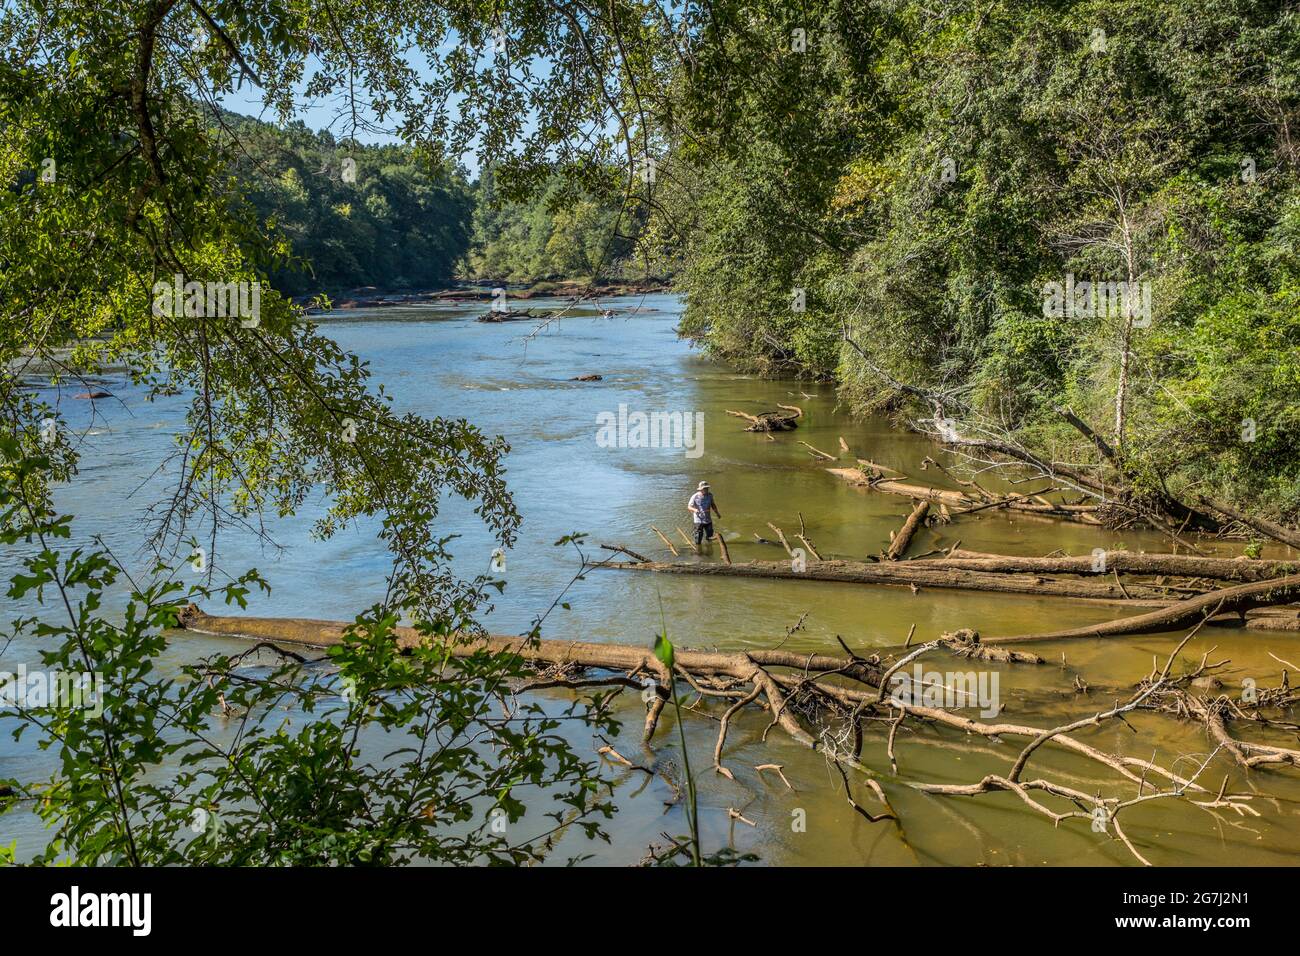 Looking down from the cliff side at a man fishing in the shallow water by the fallen trees in the Chattahoochee river on a sunny day in late summertim Stock Photo